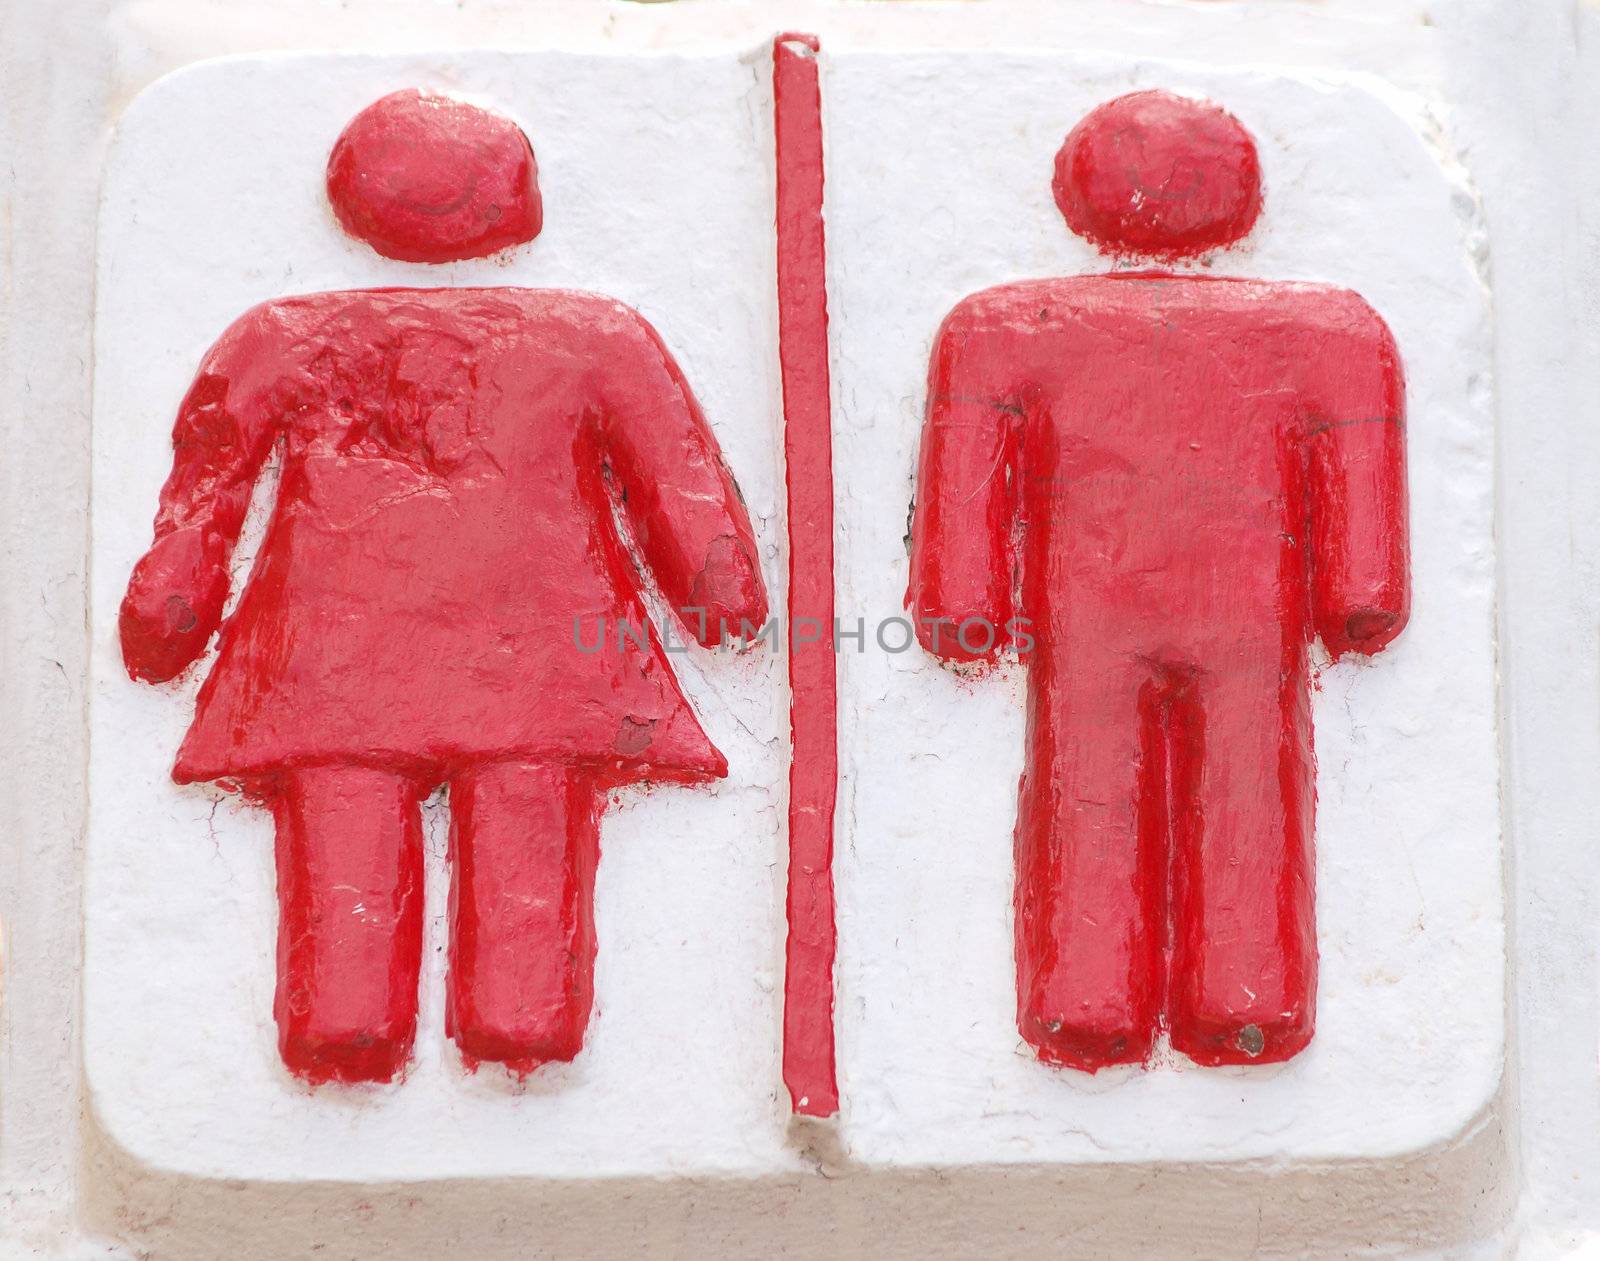 Restroom signs for men and women by jakgree